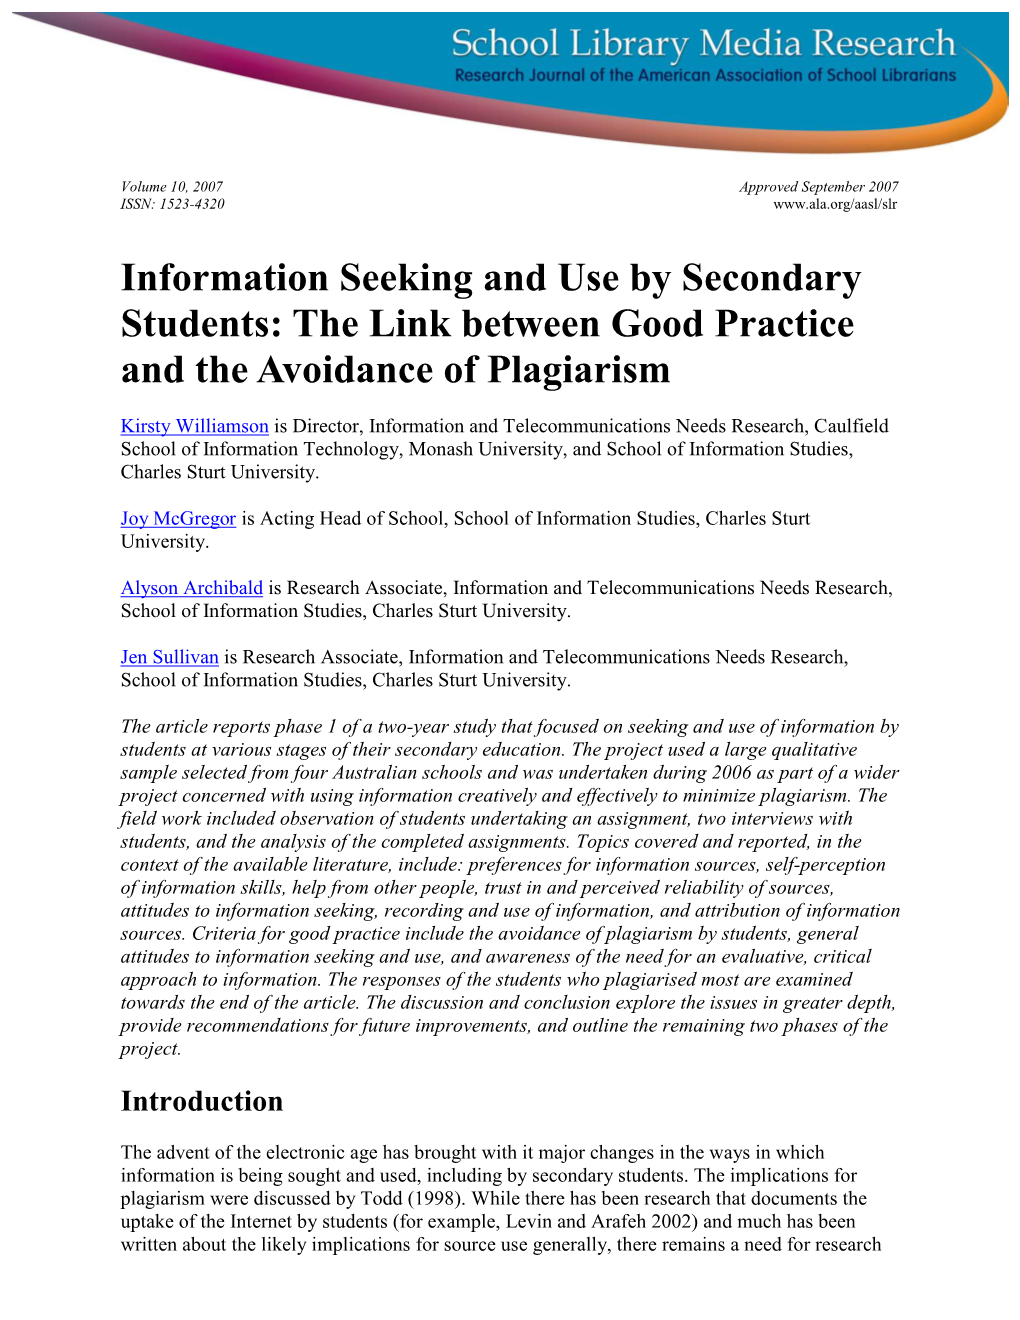 Information Seeking and Use by Secondary Students: the Link Between Good Practice and the Avoidance of Plagiarism